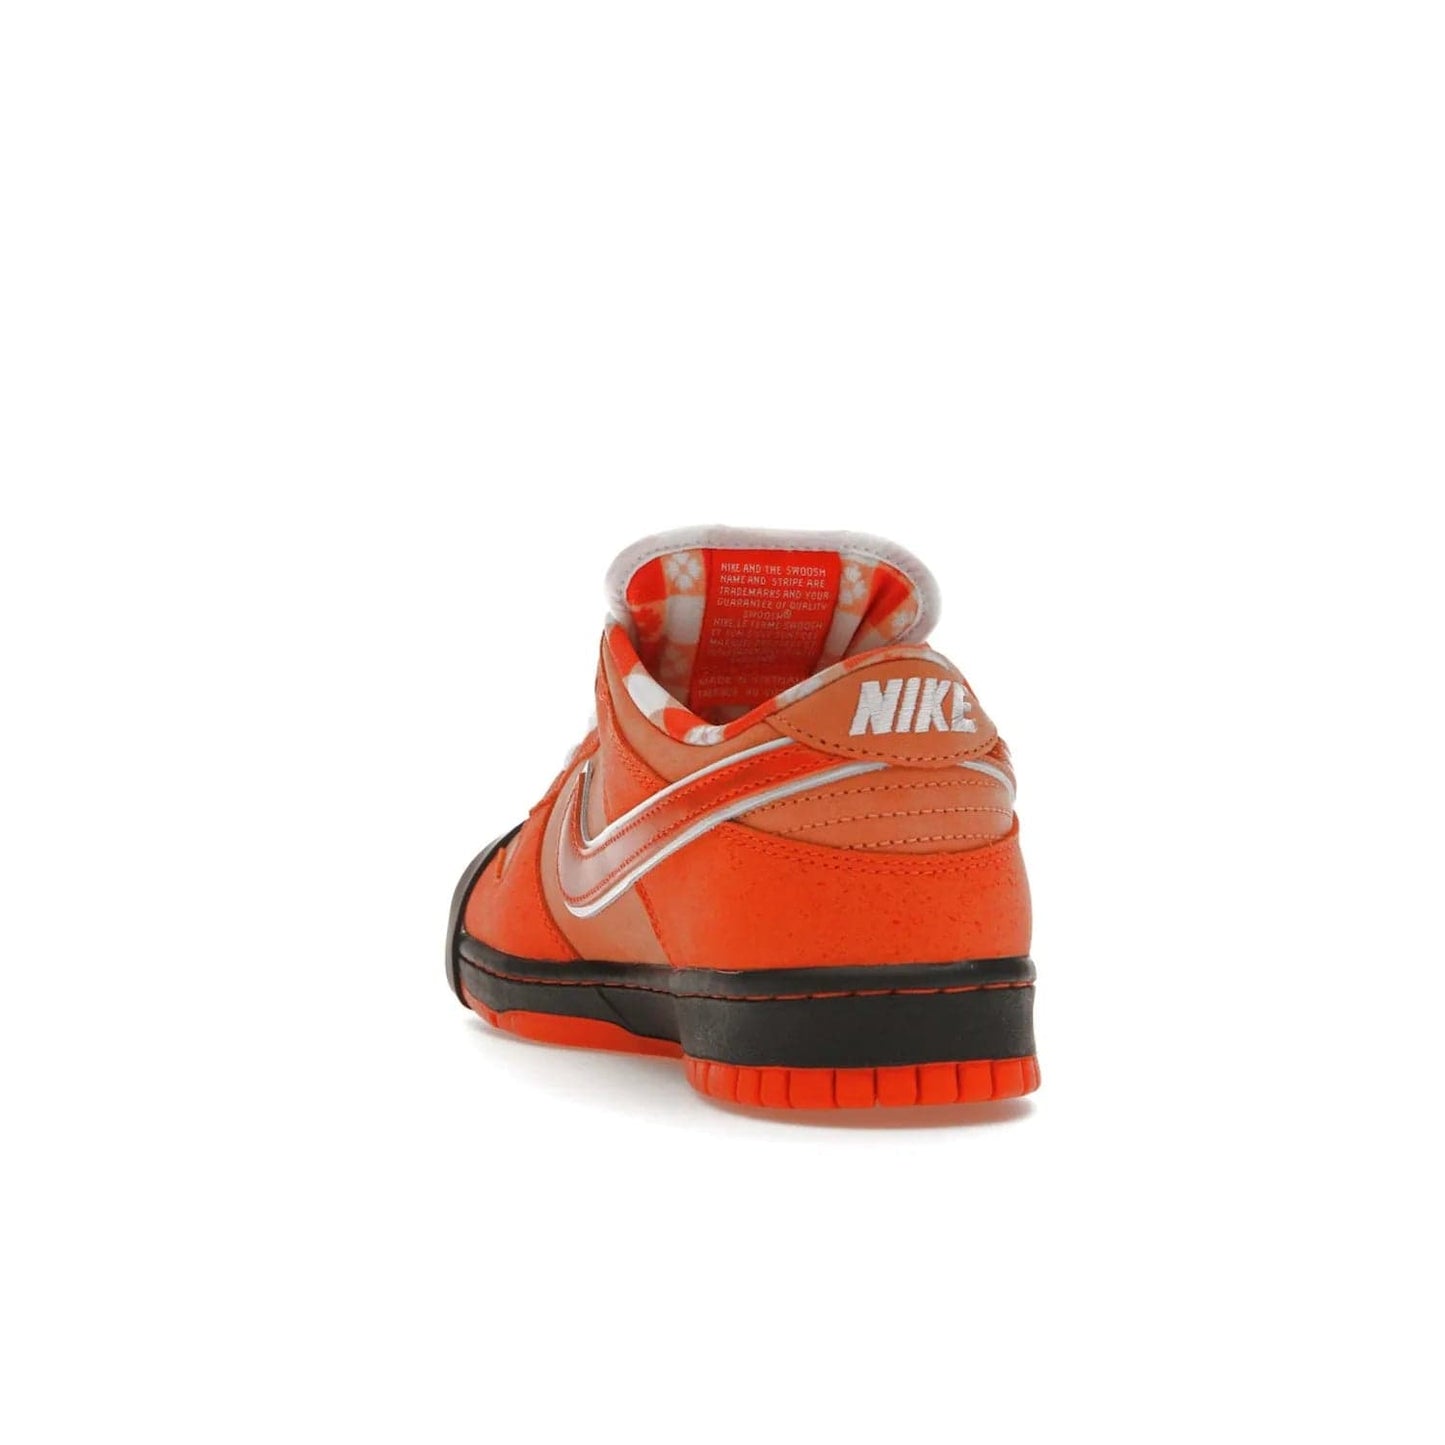 Nike SB Dunk Low Concepts Orange Lobster - Image 26 - Only at www.BallersClubKickz.com - Make a statement with the Nike SB Dunk Low Concepts Orange Lobster. Variety of orange hues, nubuck upper, bib-inspired lining & rubber outsole create bold look & comfortable blend of style. Available December 20th, 2022.